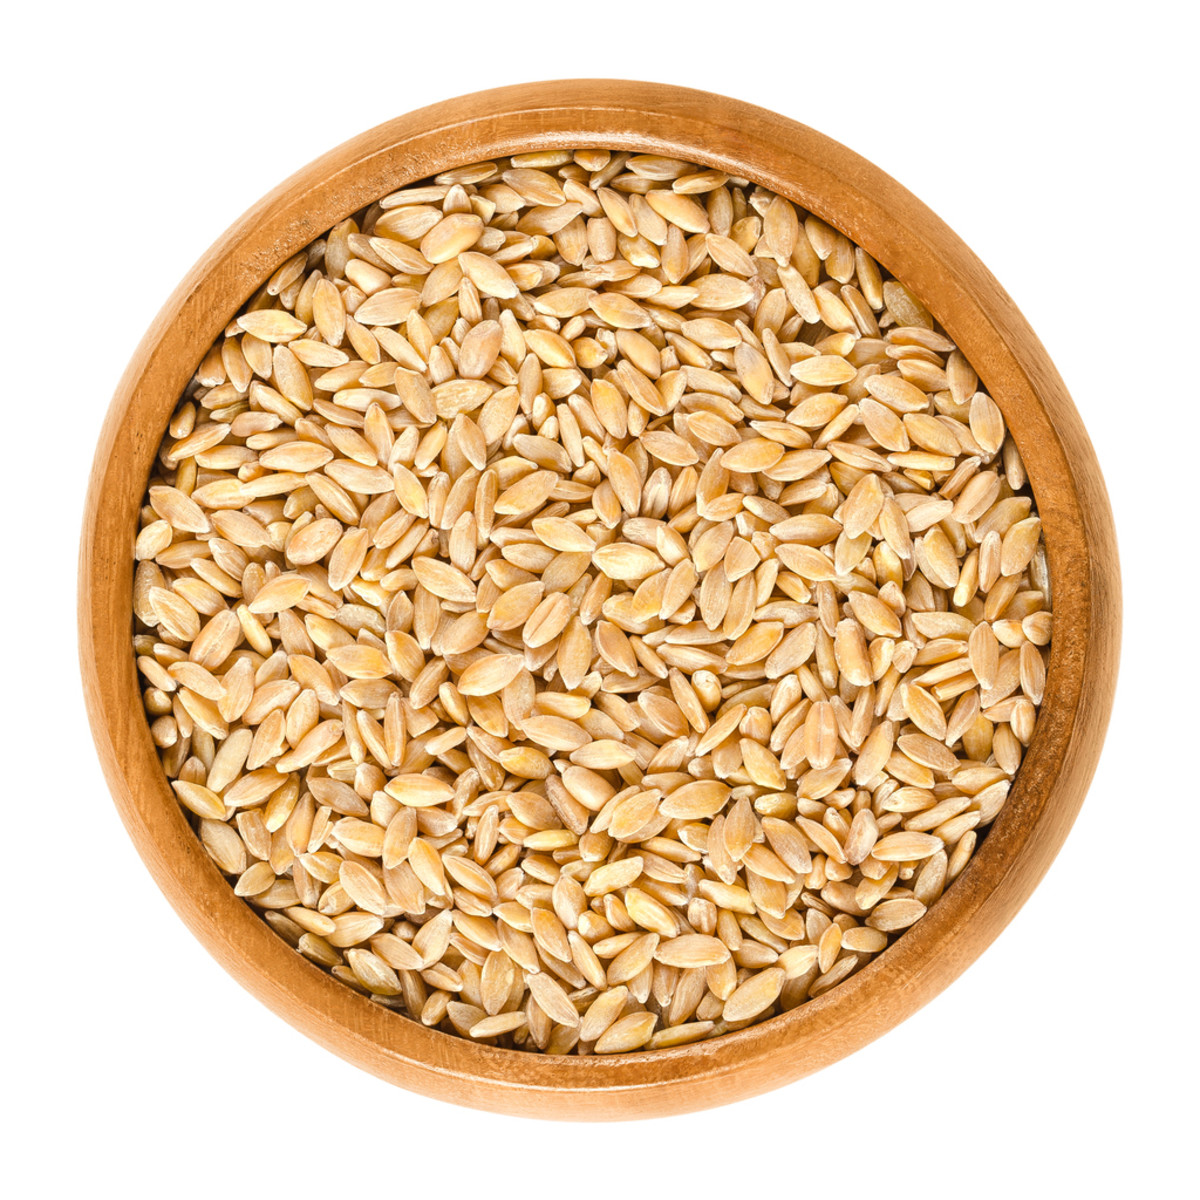 Einkorn wheat in wooden bowl, also called littlespelt. Dried grains. Triticum monococcum. One of the first domesticated and cultivated plants. Isolated macro food photo close up from above over white.